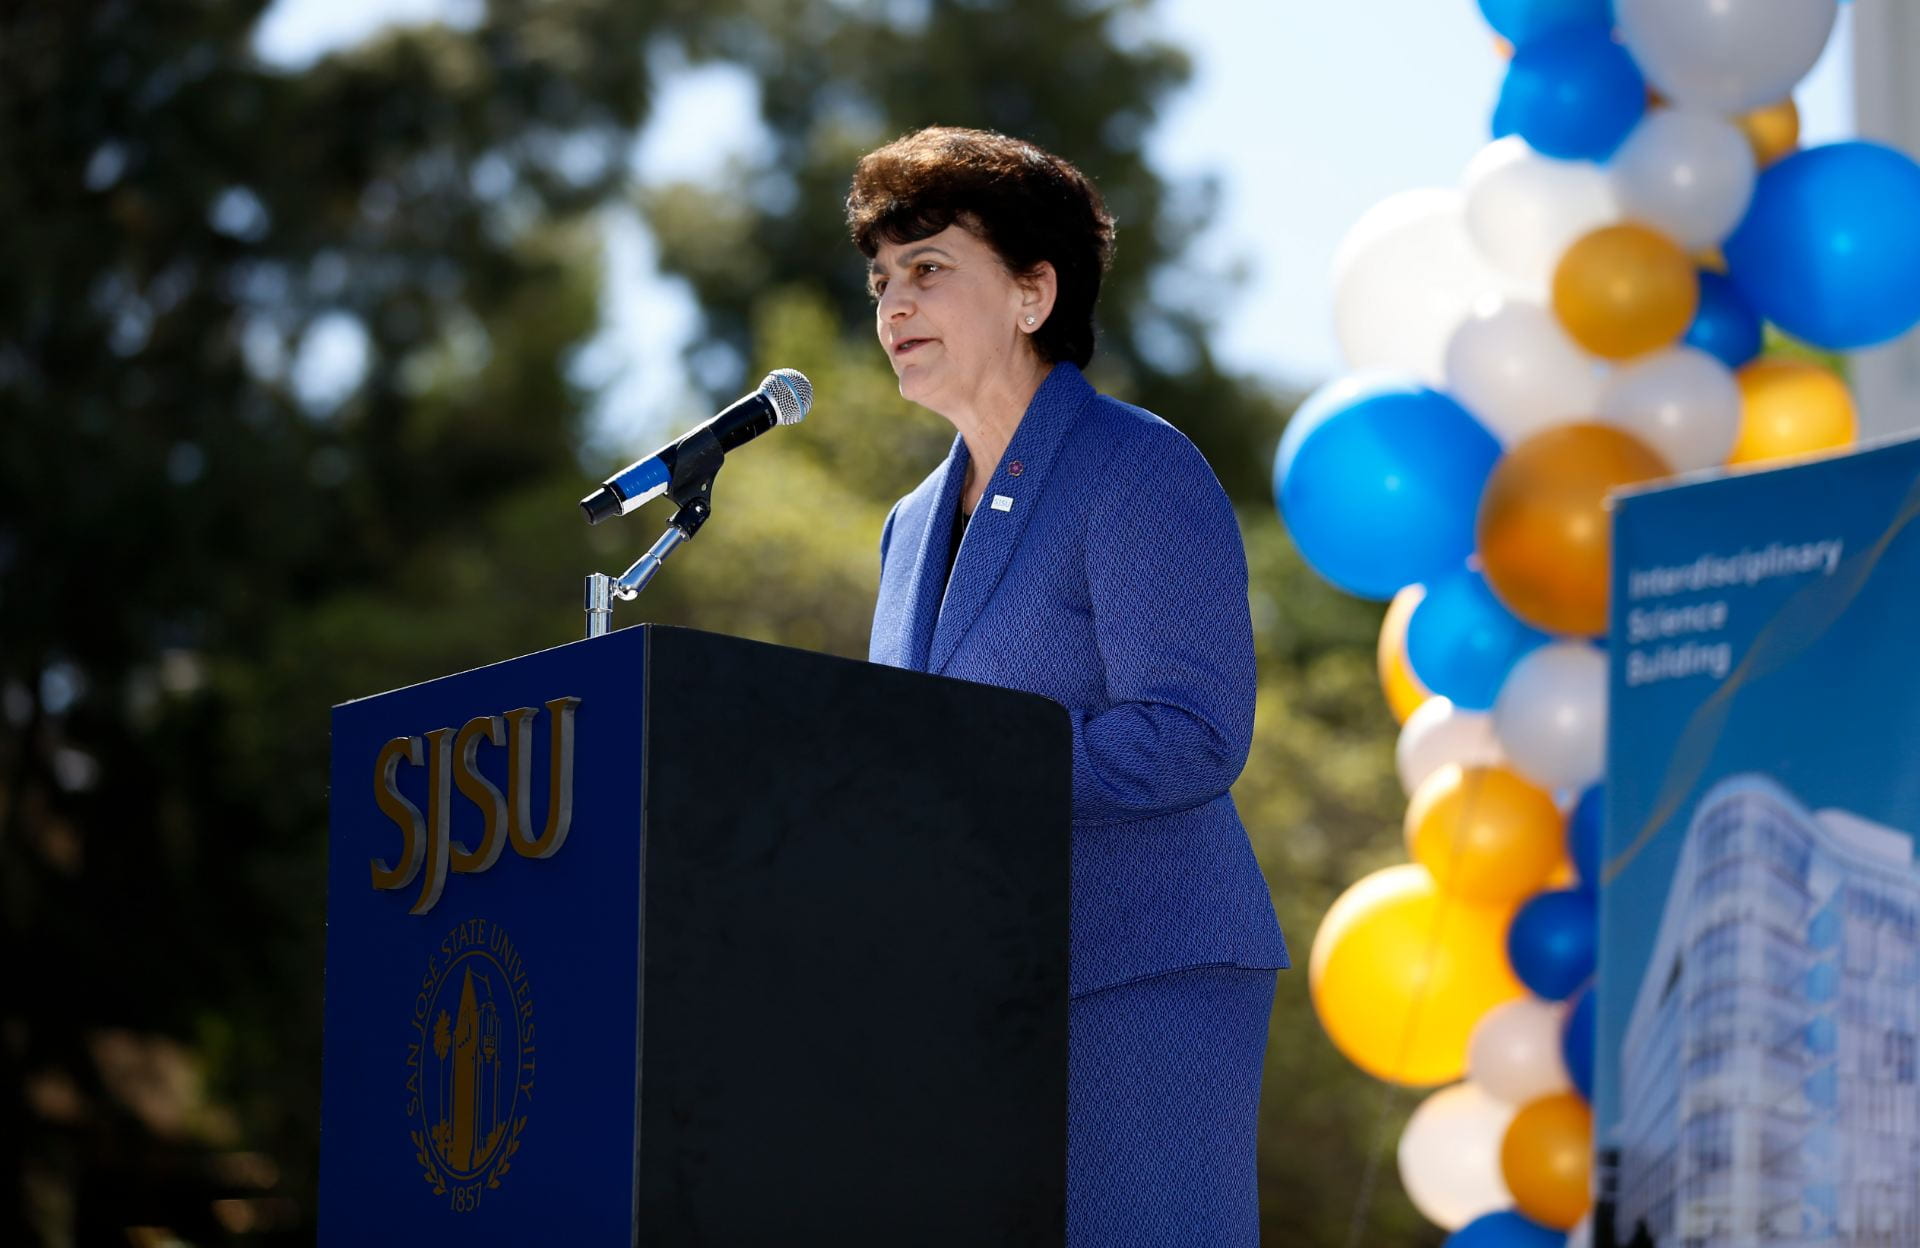 San Jose State University president Dr. Mary A. Papazian, was named to the Silicon Valley Business Journal's 2019 Women of Influence list. (Photo: Josie Lepe, '03 BFA Photography )